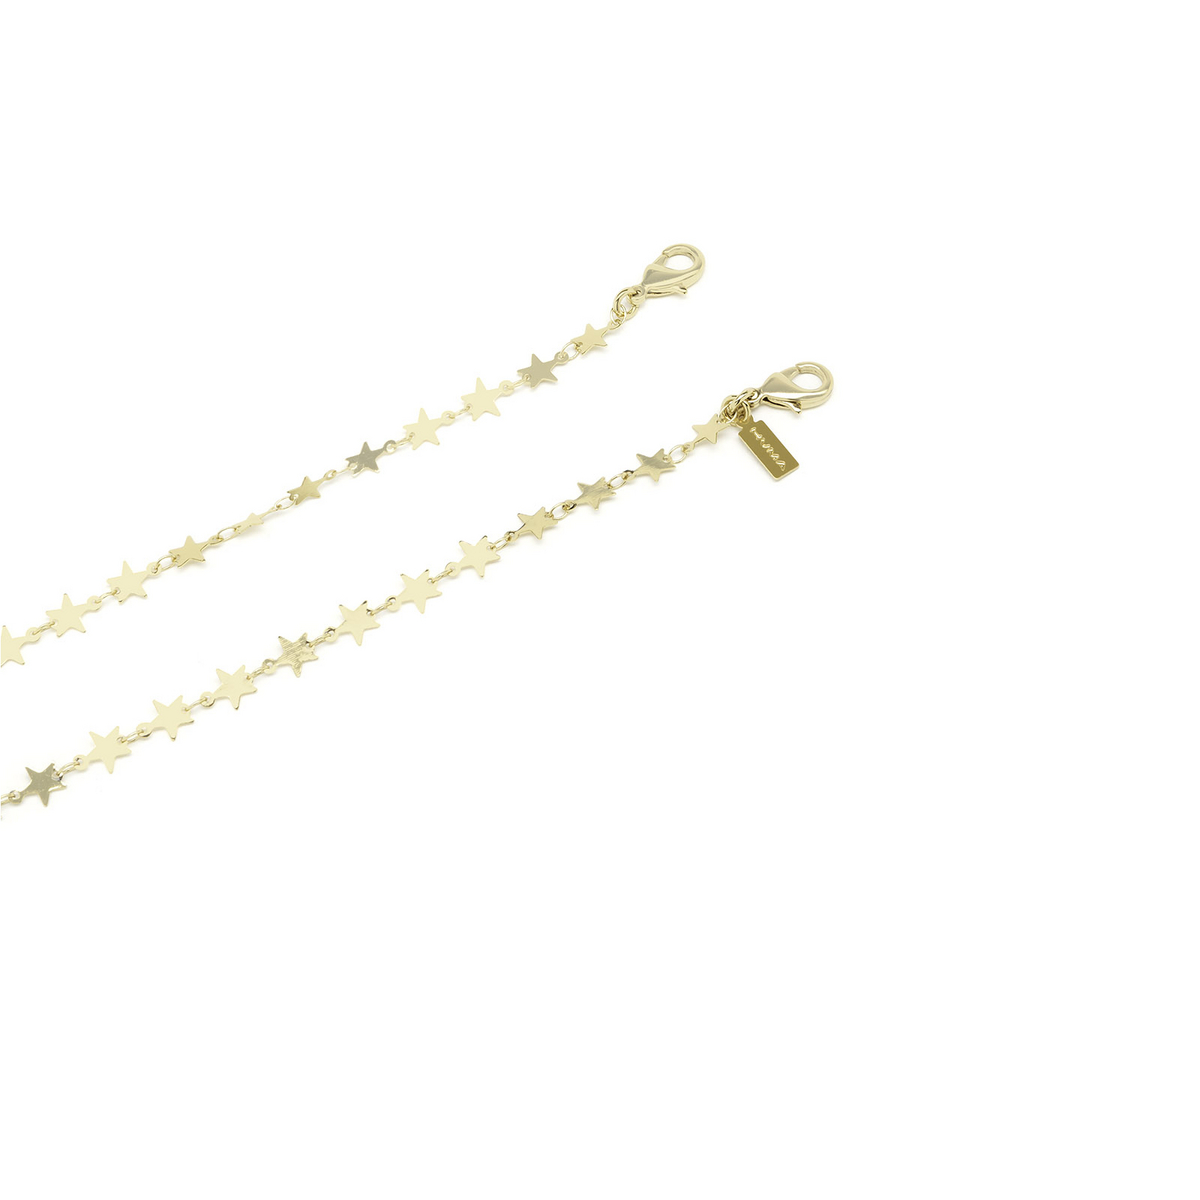 Huma® Accessories: Star Chain color Gold L04 - front view.